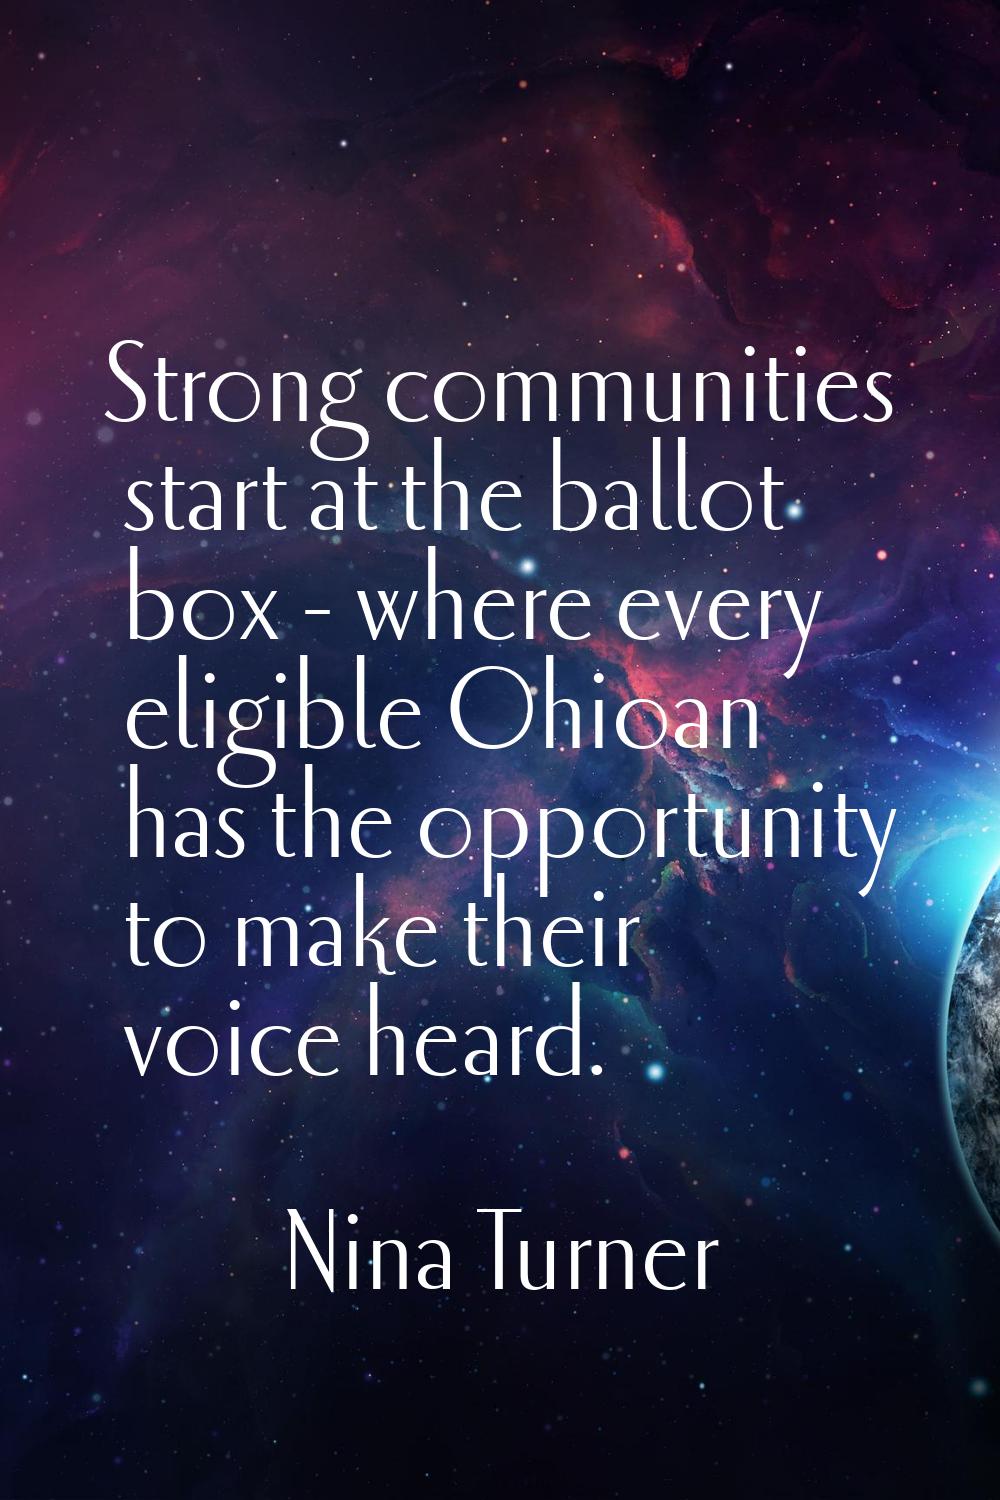 Strong communities start at the ballot box - where every eligible Ohioan has the opportunity to mak